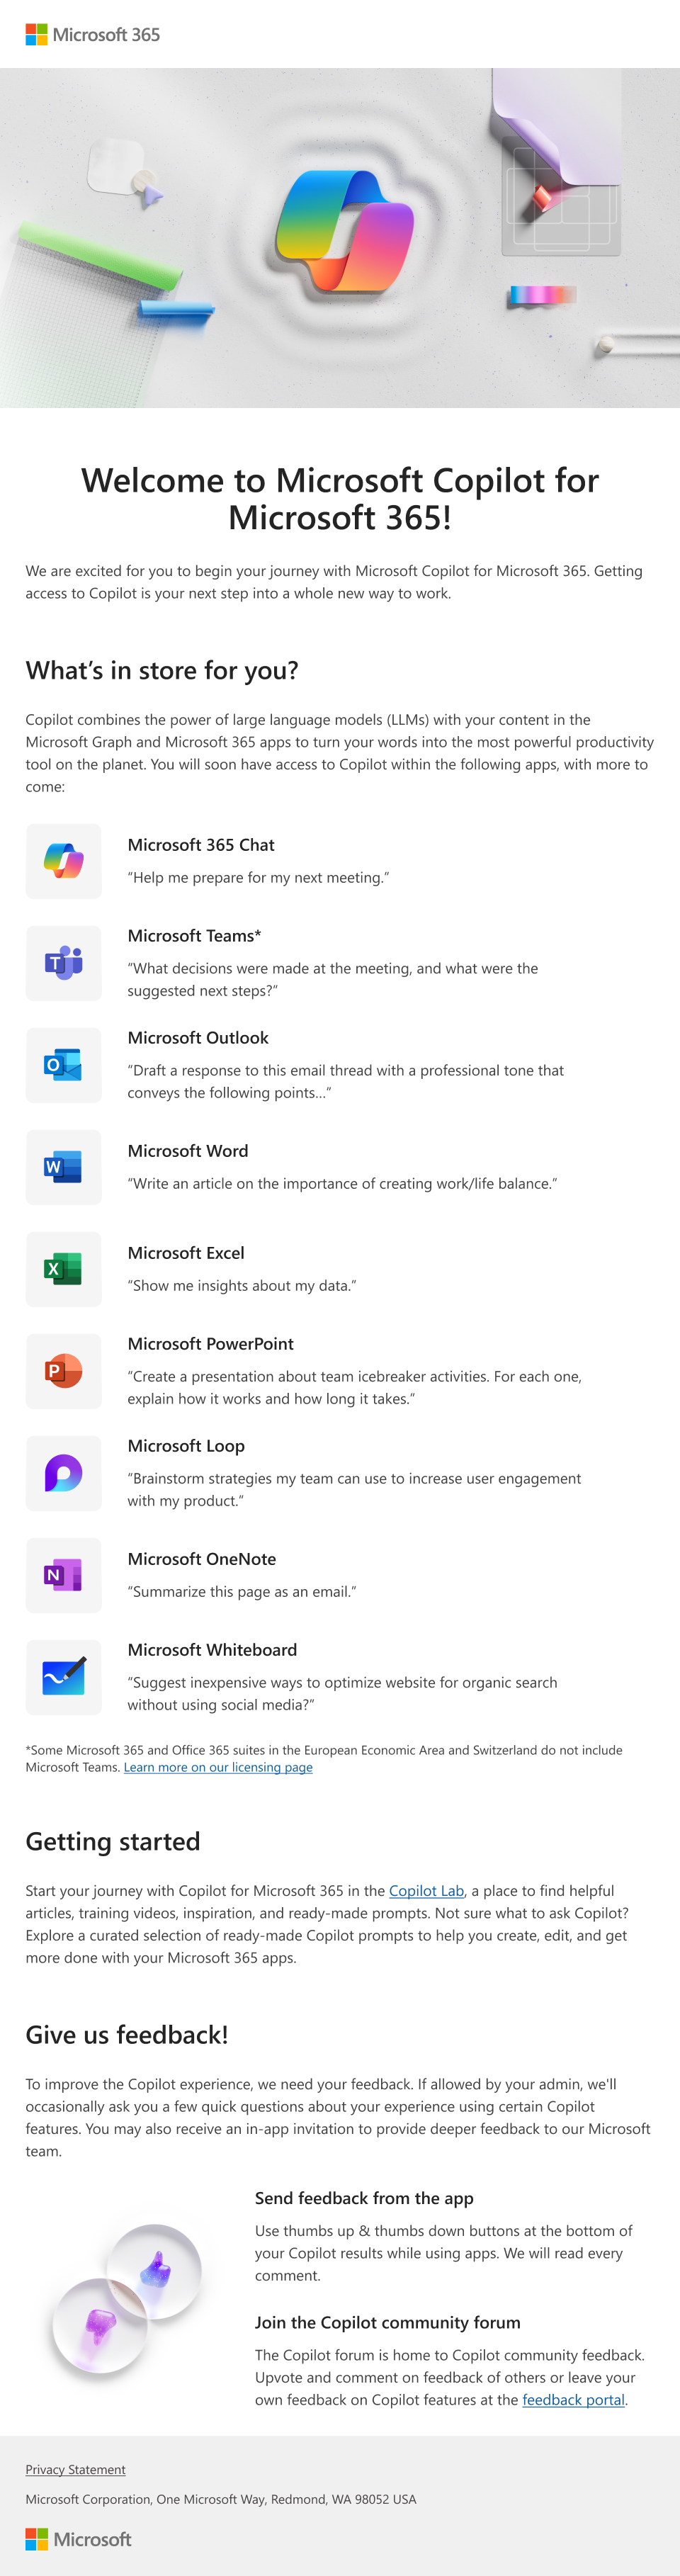 An image of an email introducing Microsoft Copilot for Microsoft 365 and its capabilities that an admin can provide to users.